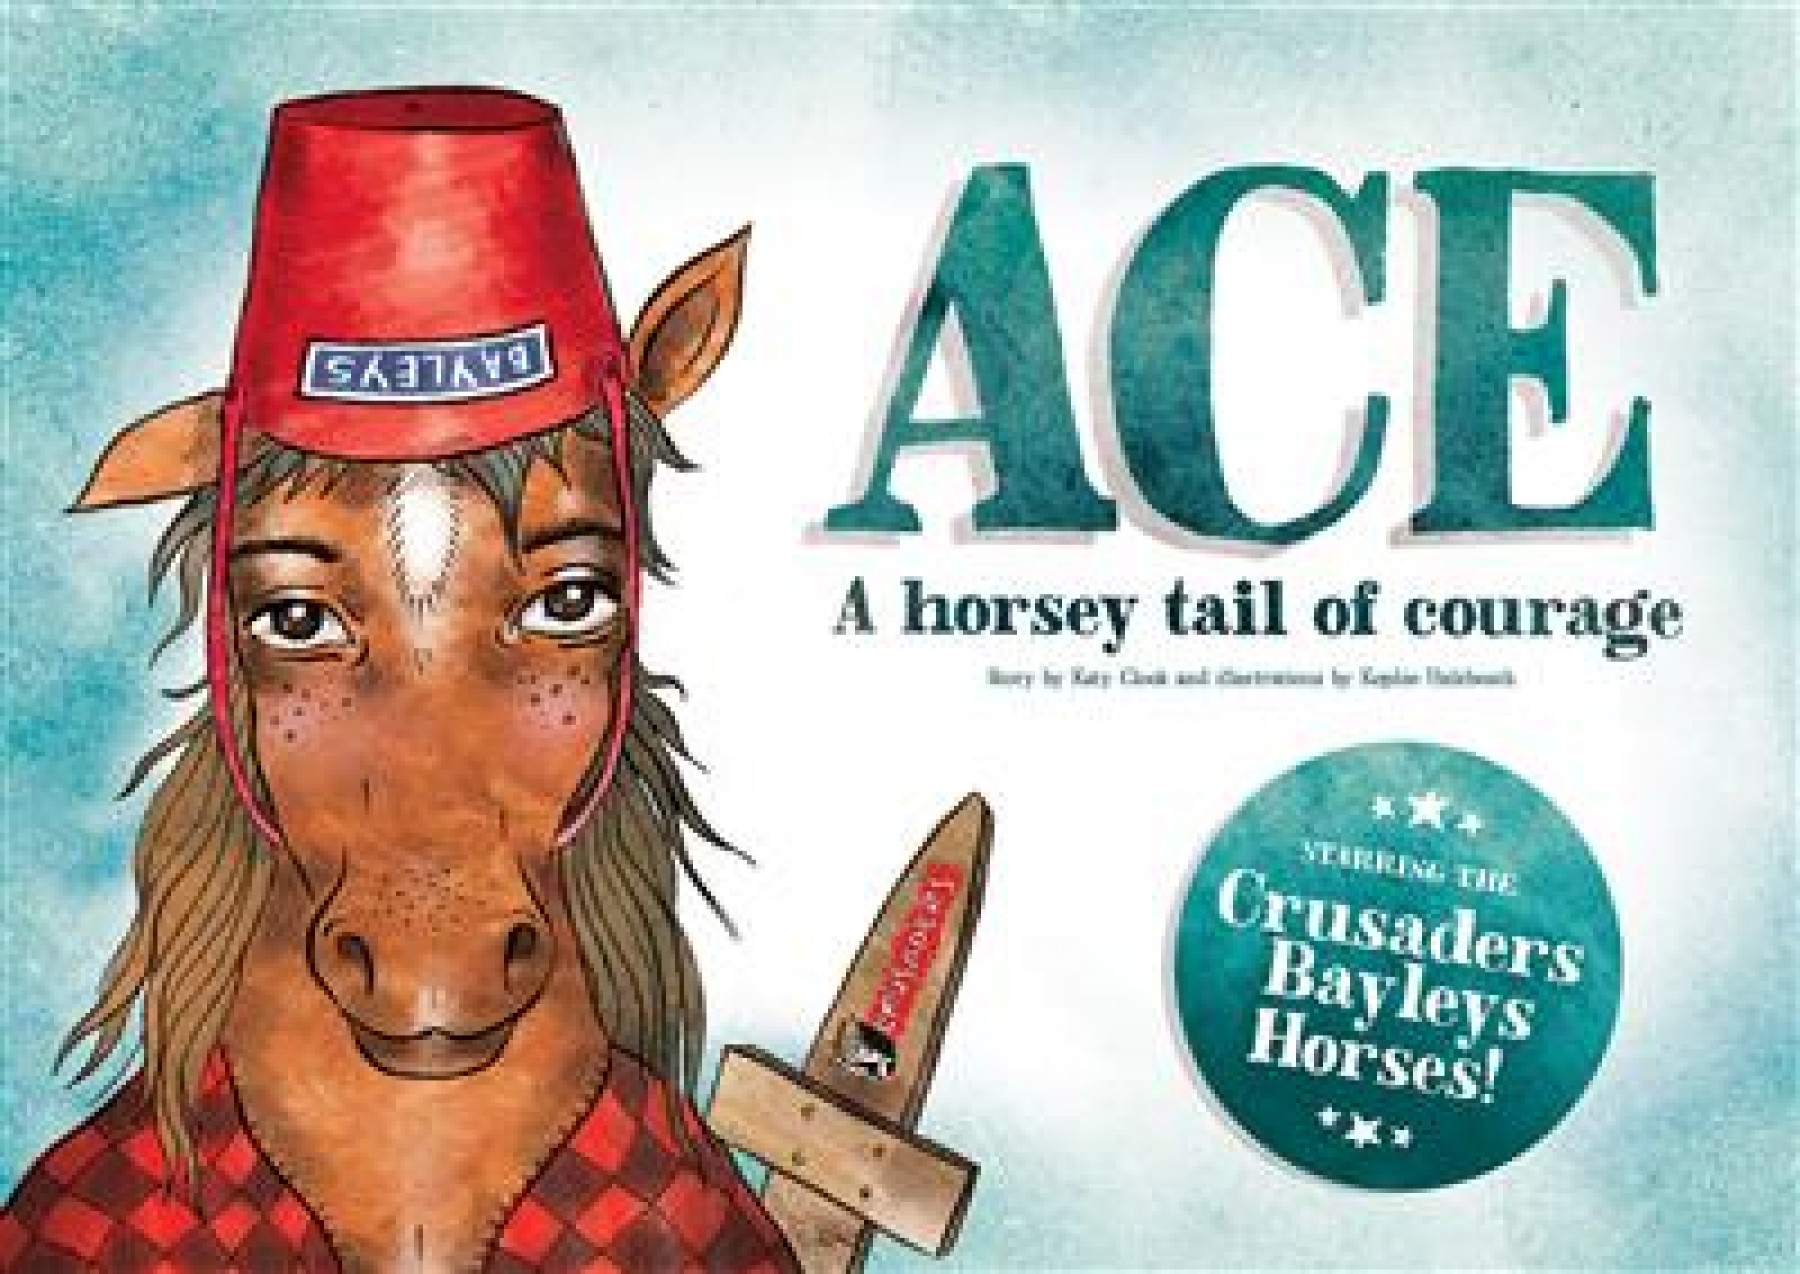 ACE – A horsey tail of courage